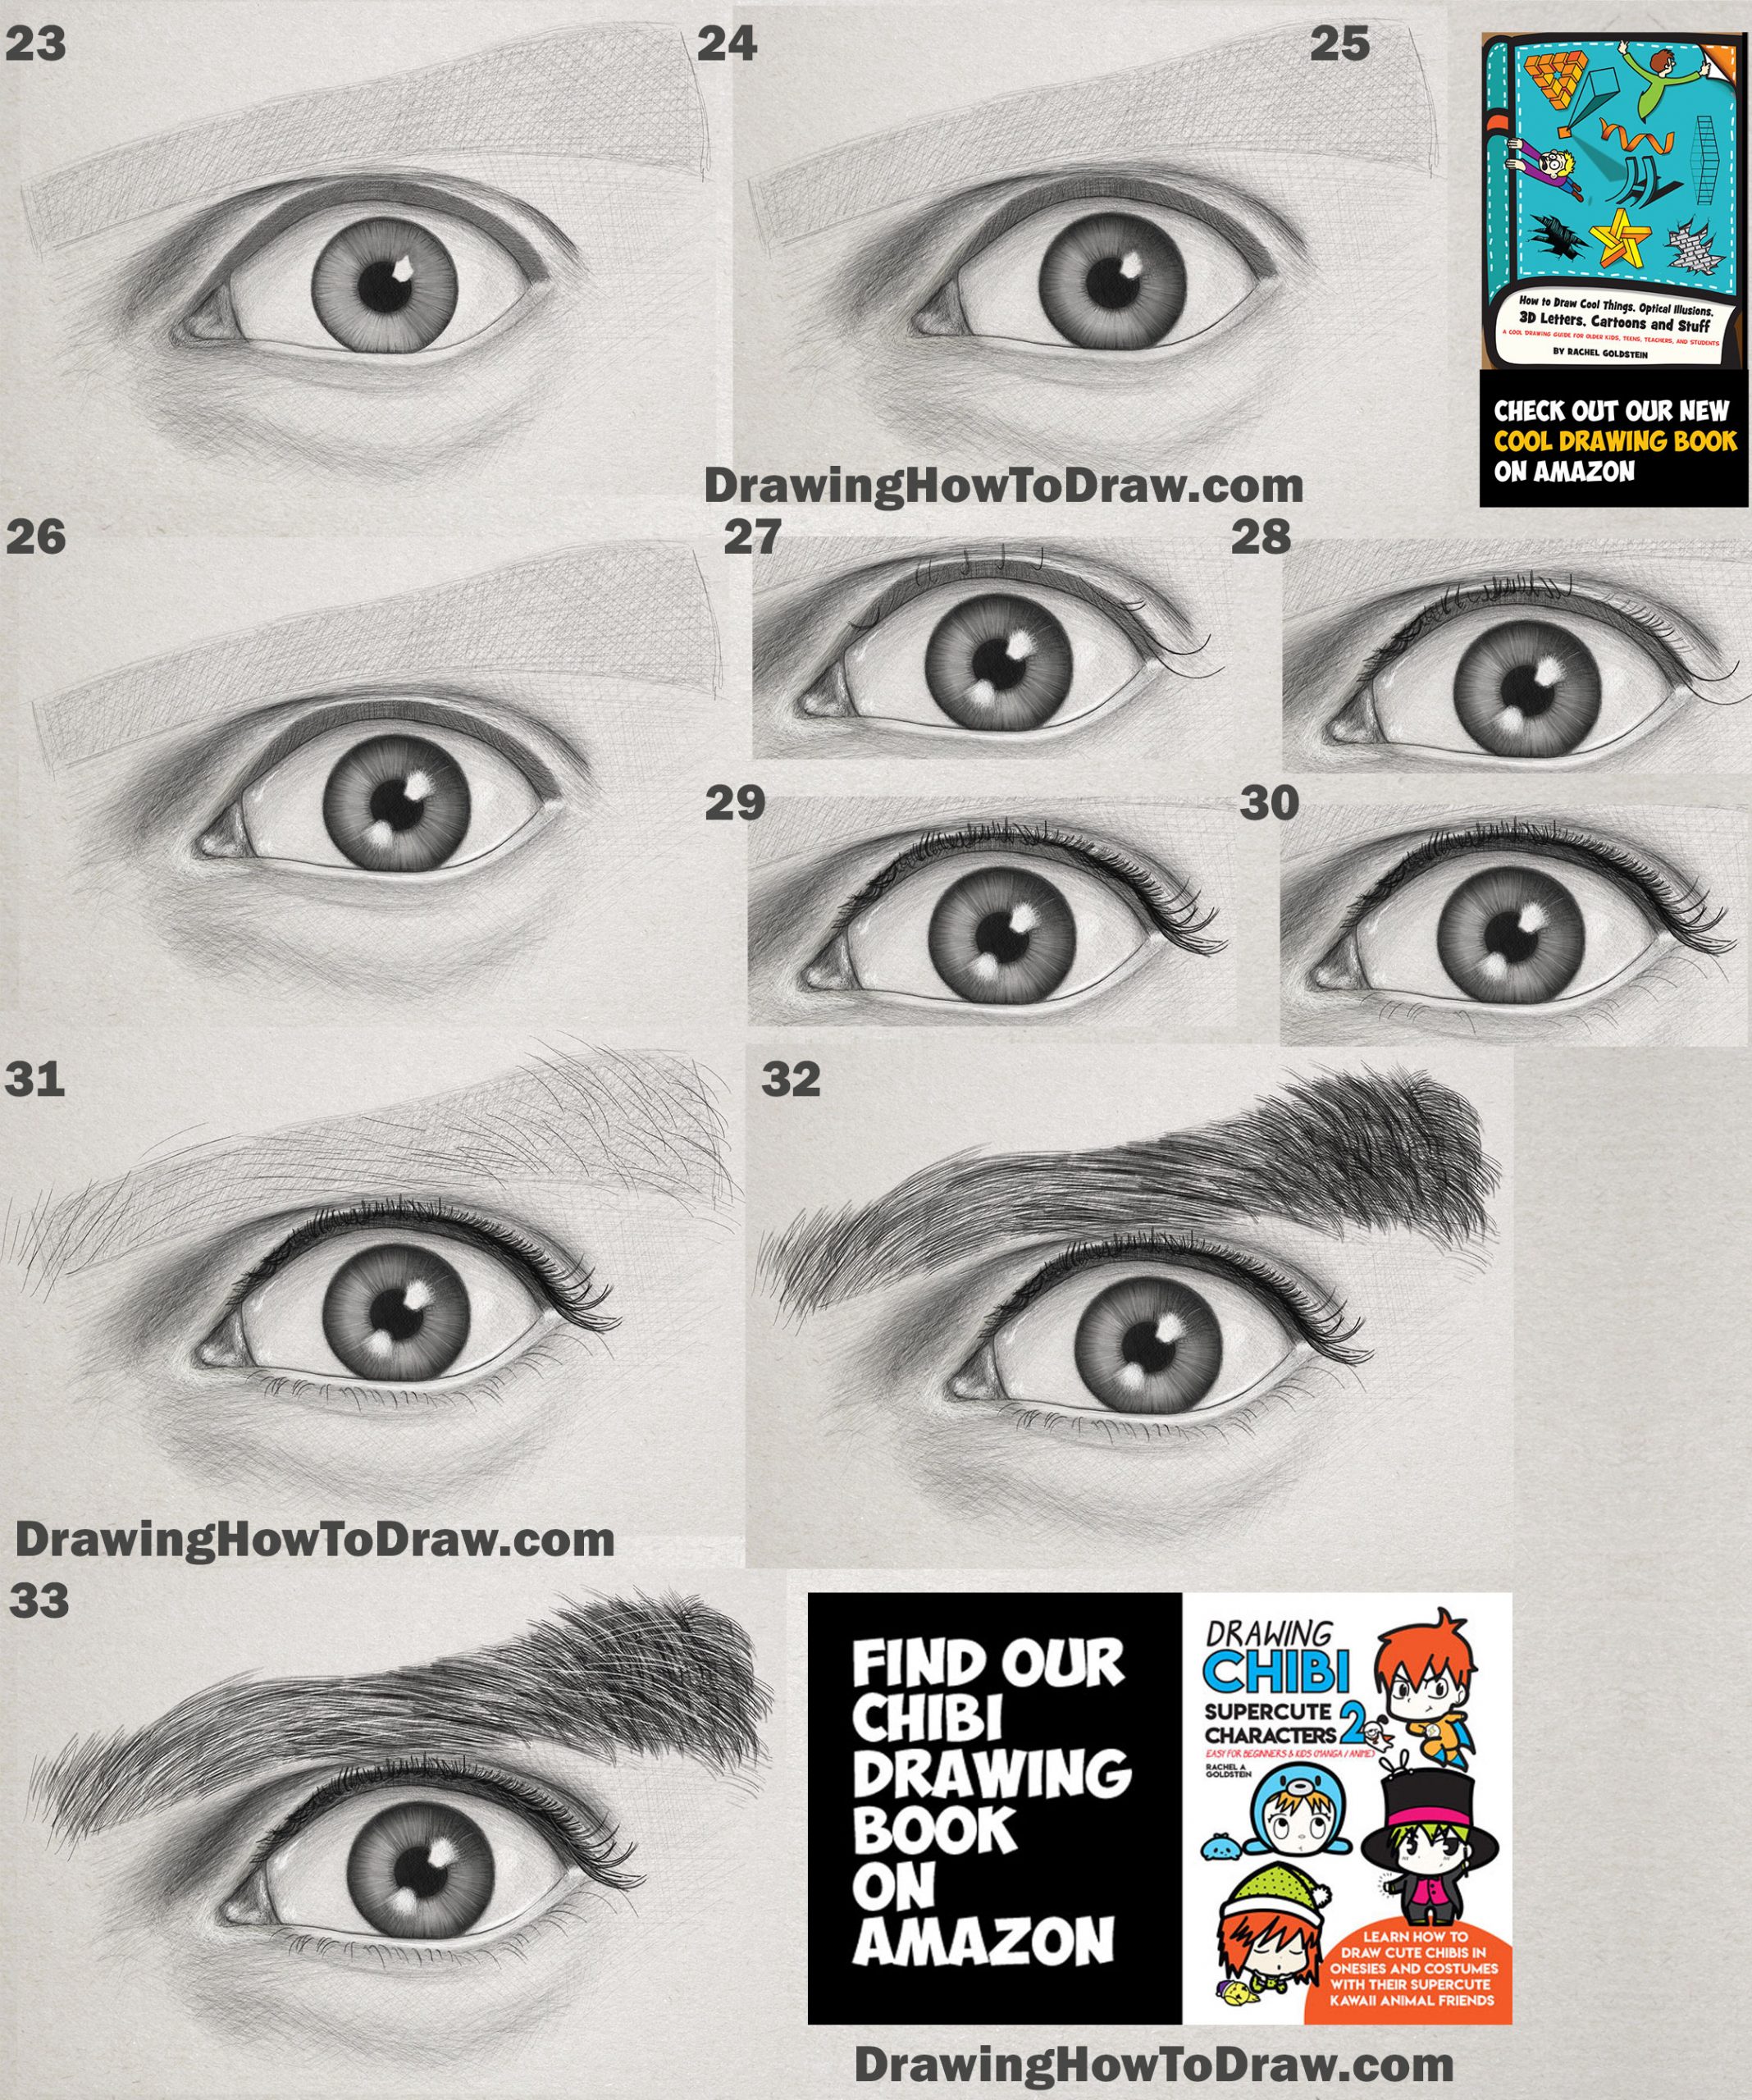 How to Draw an Eye Realistic Man’s Eye Step by Step Drawing